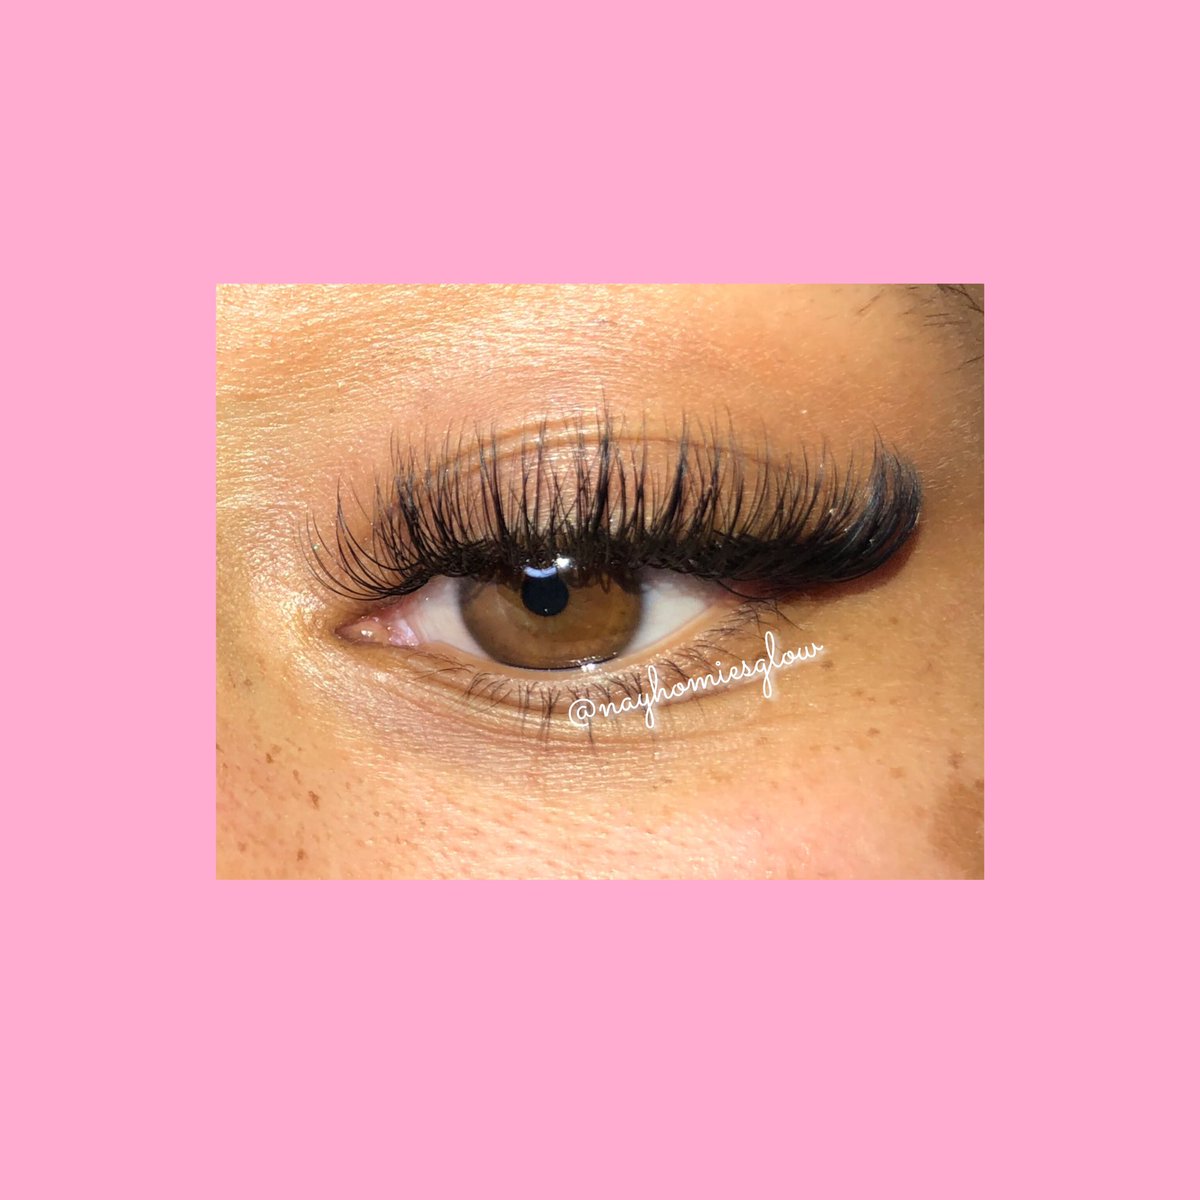 BBYGURL 💎 these baby doll hybrids are POPPINNGGGG 🤩 I used .12-.15 on this beauty!

#nayhomiesglow #licensedesthetician #lashextensions #hybridset #babydolllashes #lashboxla #bellalash #newyearslashes #feelpretty #fluffylashes #popping #consistencyiskey #highdesertbeauties